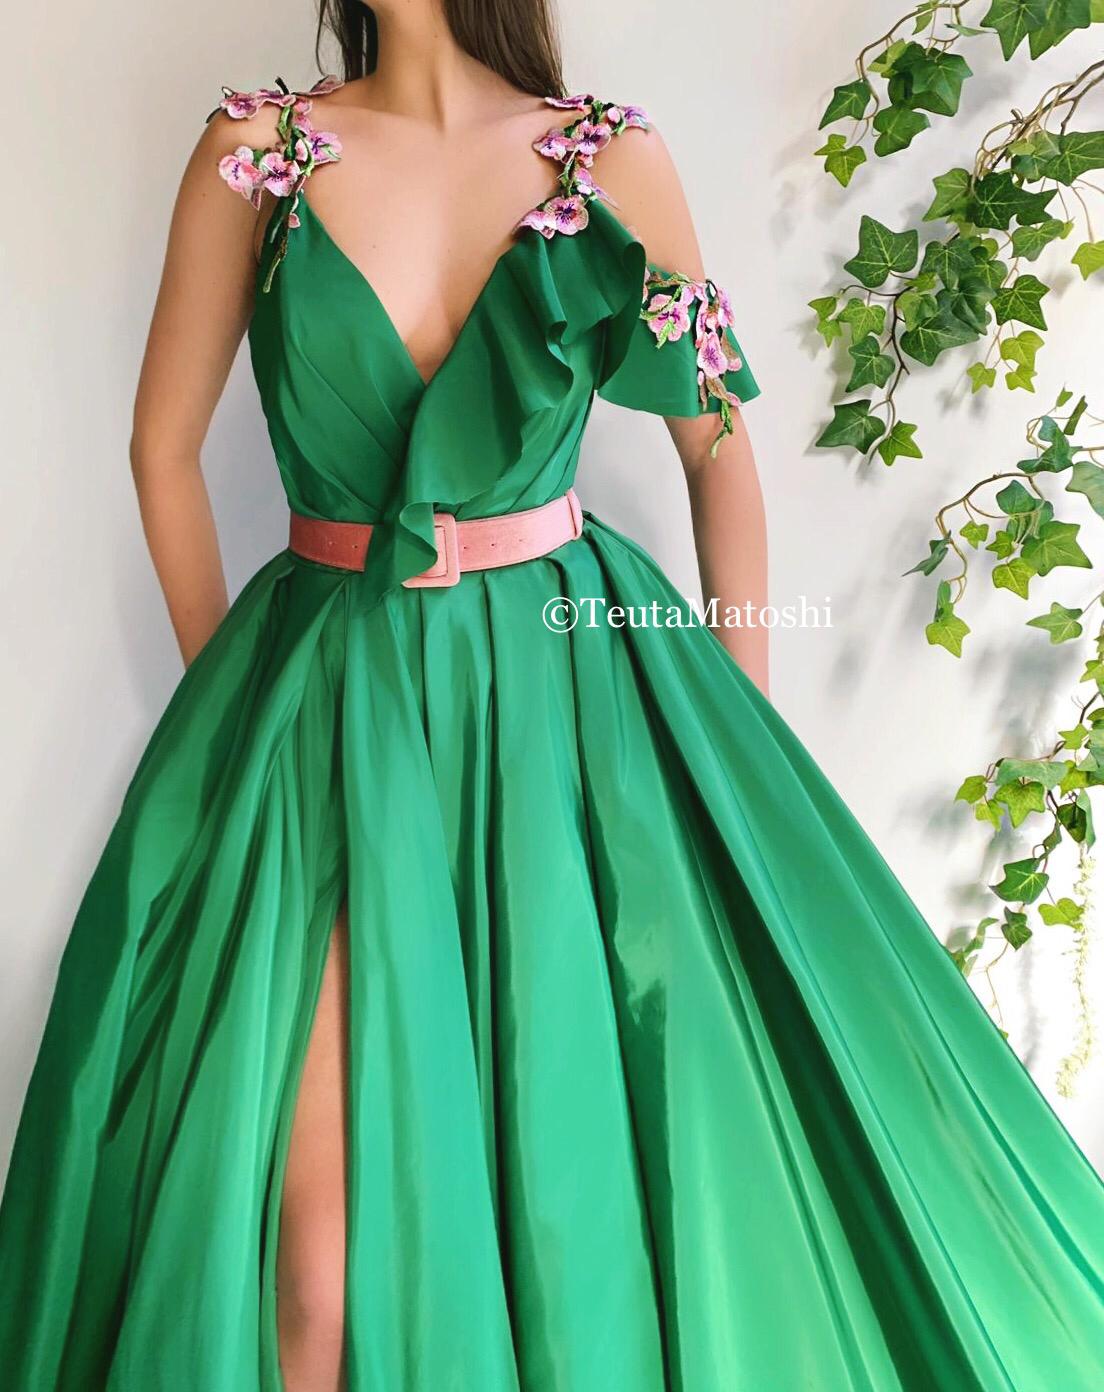 Green A-Line dress with one off the shoulder sleeve, straps, belt and embroidery